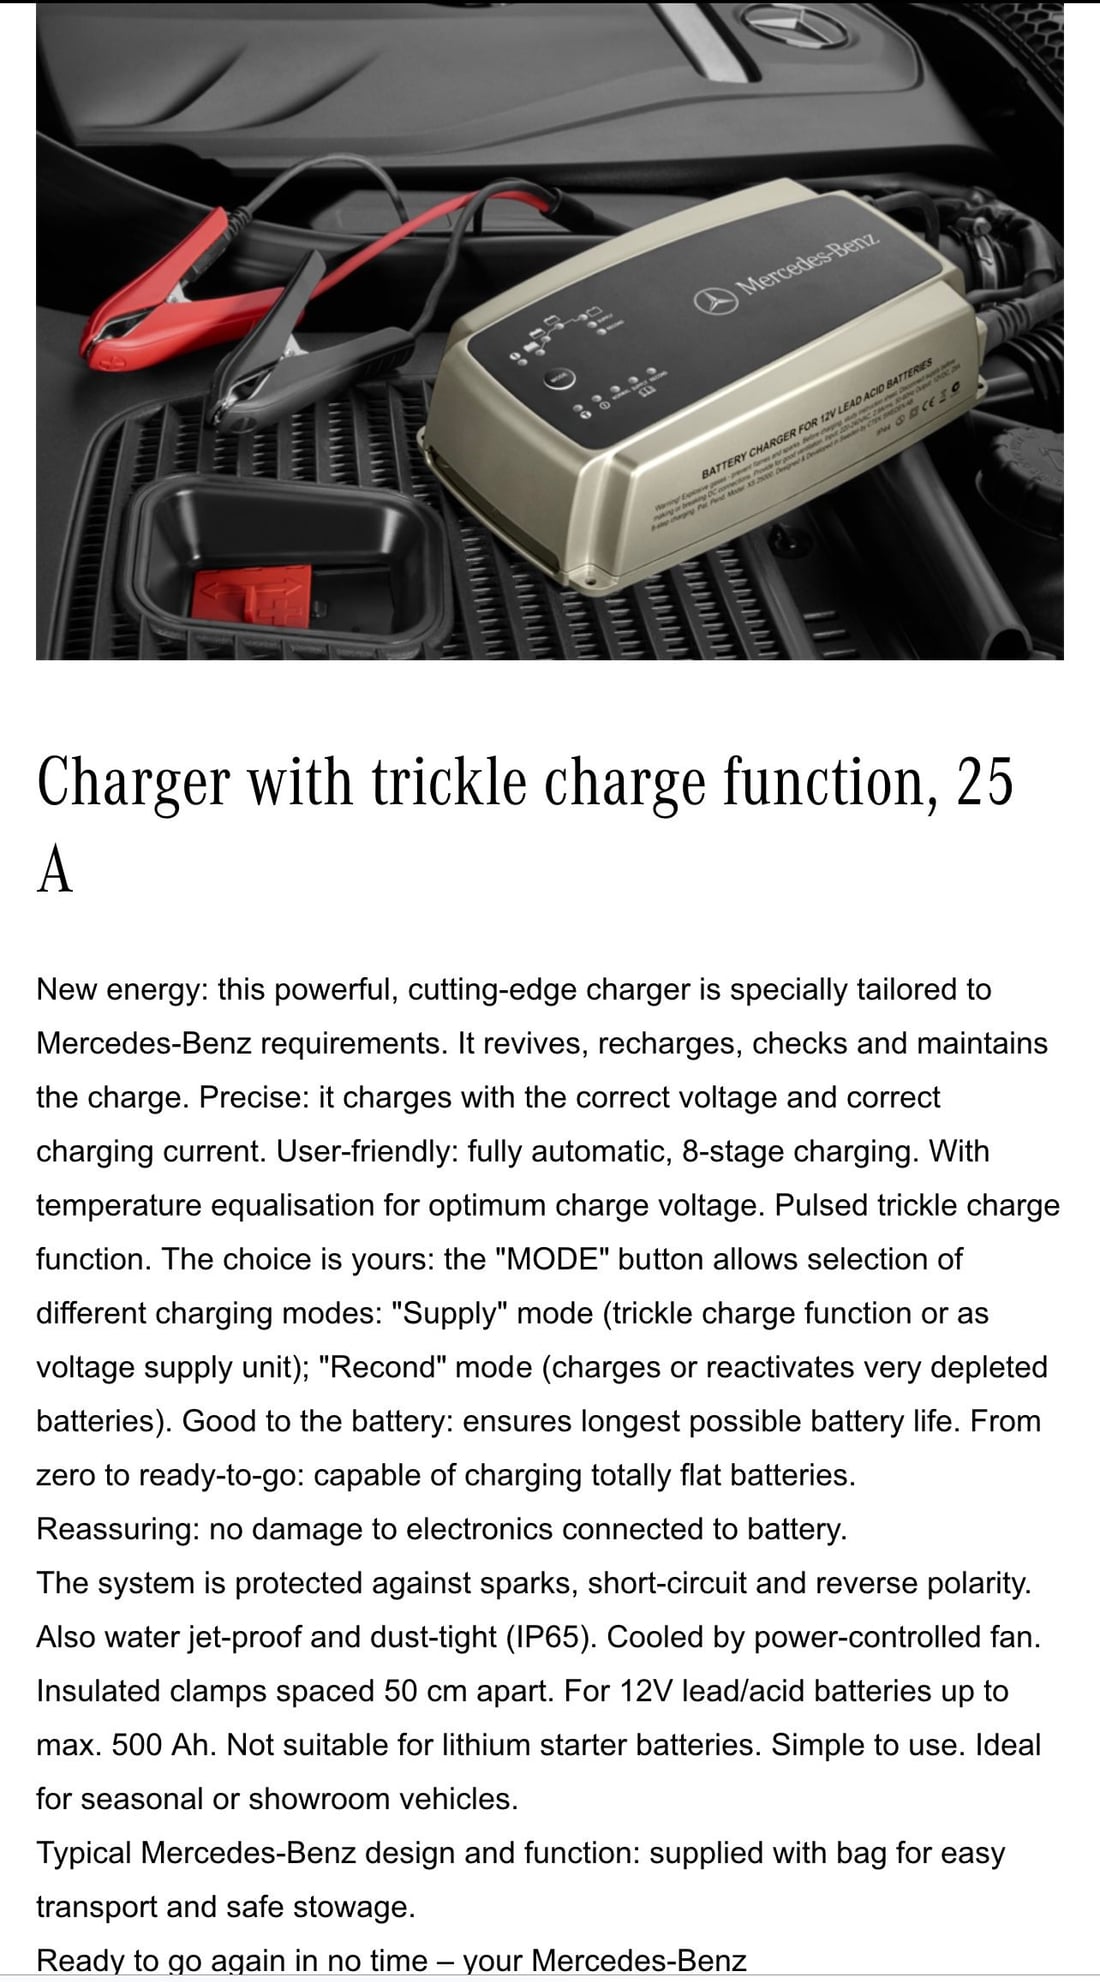 Charger with trickle charge function, 25 A, 2021 E 350 Sedan